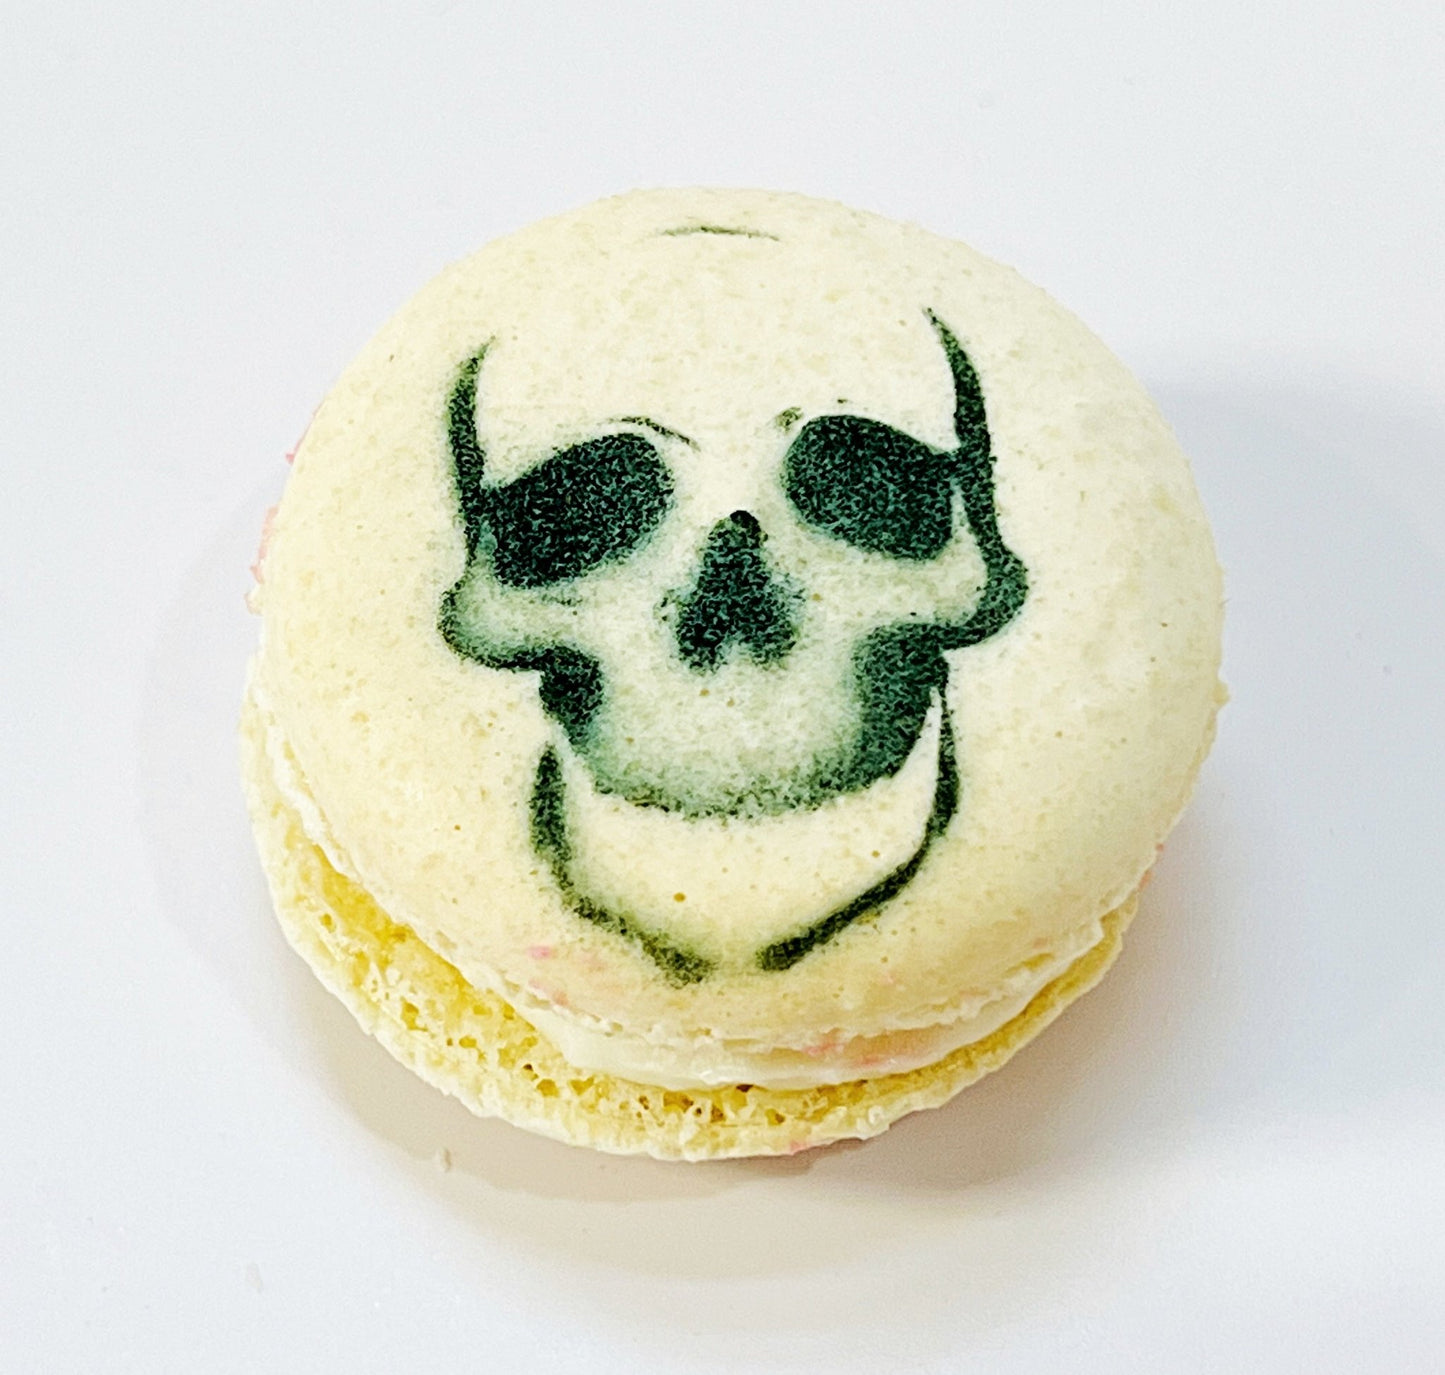 Skull French Macaron | Choose Your Favorite Flavors - Macaron Centrale6 PackVanilla